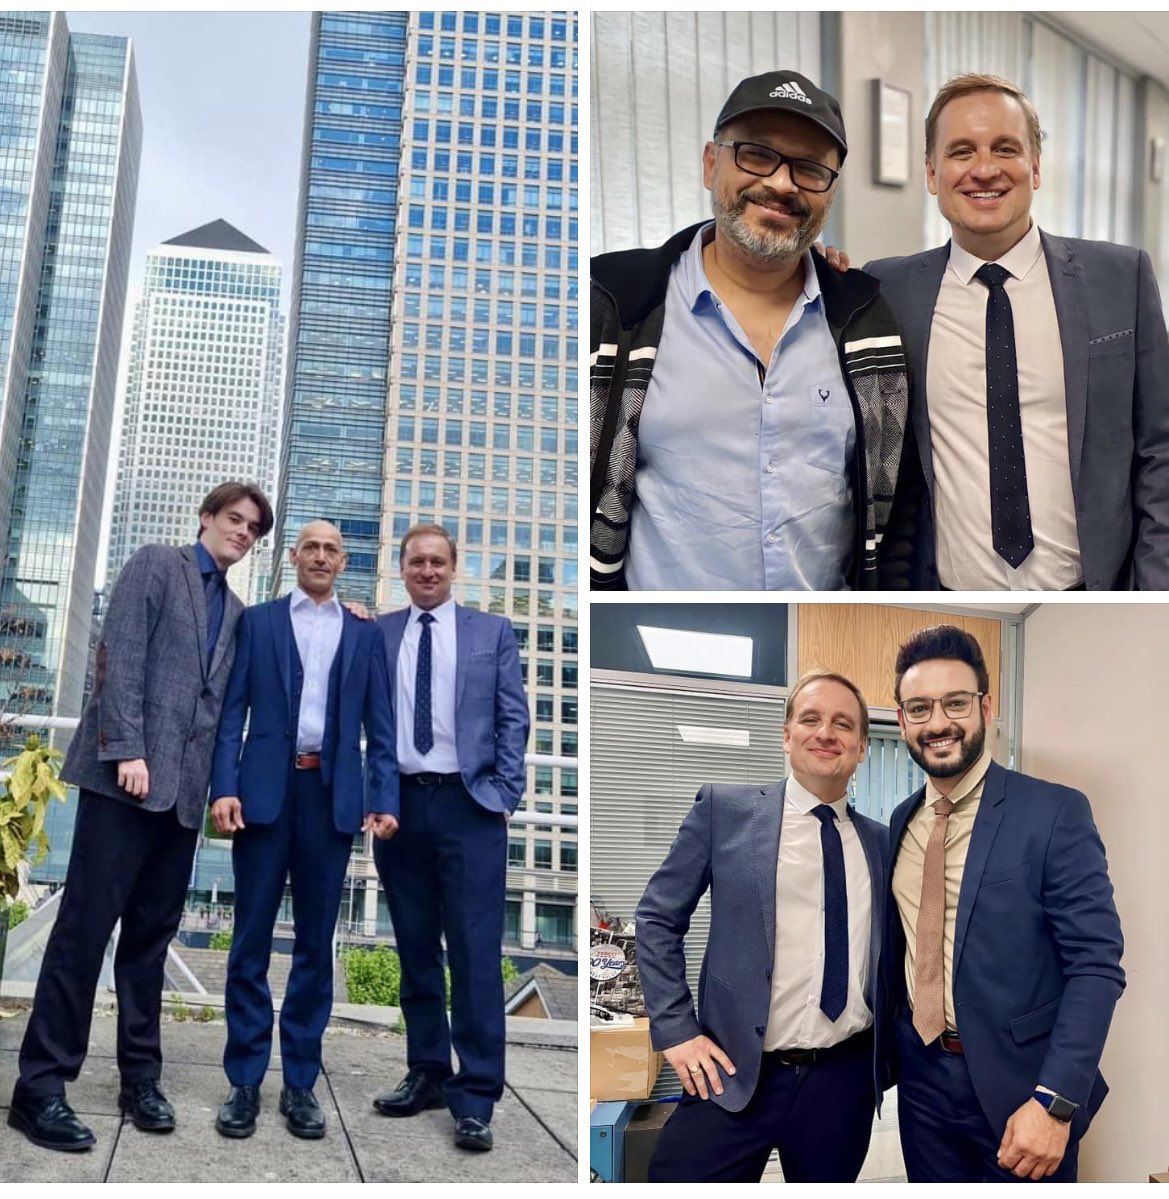 A year ago I was filming feature film Aaro Ek Prithibi at Canary Wharf, London. Very much enjoyed working with well respected director #AtanuGhosh and acting with actor #SahebBhattacharya ; playing his boss.  Terrific meeting up again with actor Sammy Jonas Heaney.